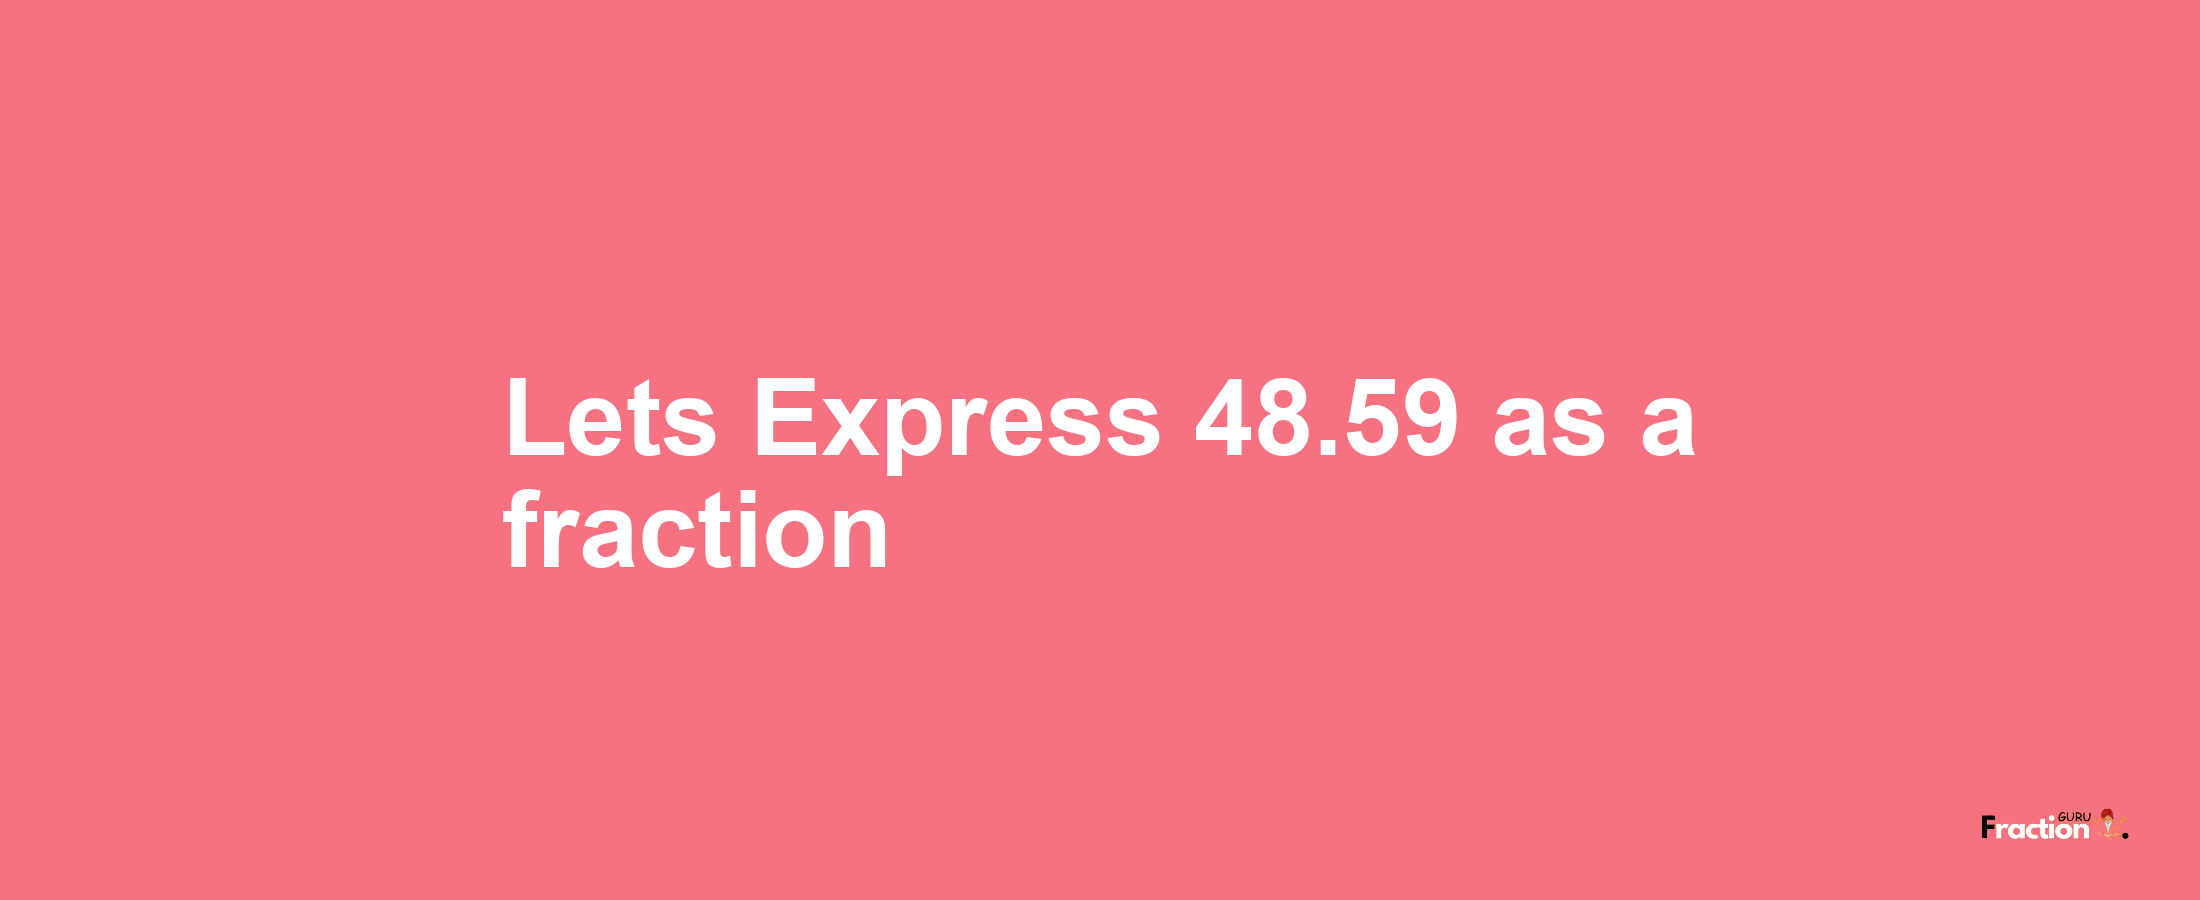 Lets Express 48.59 as afraction